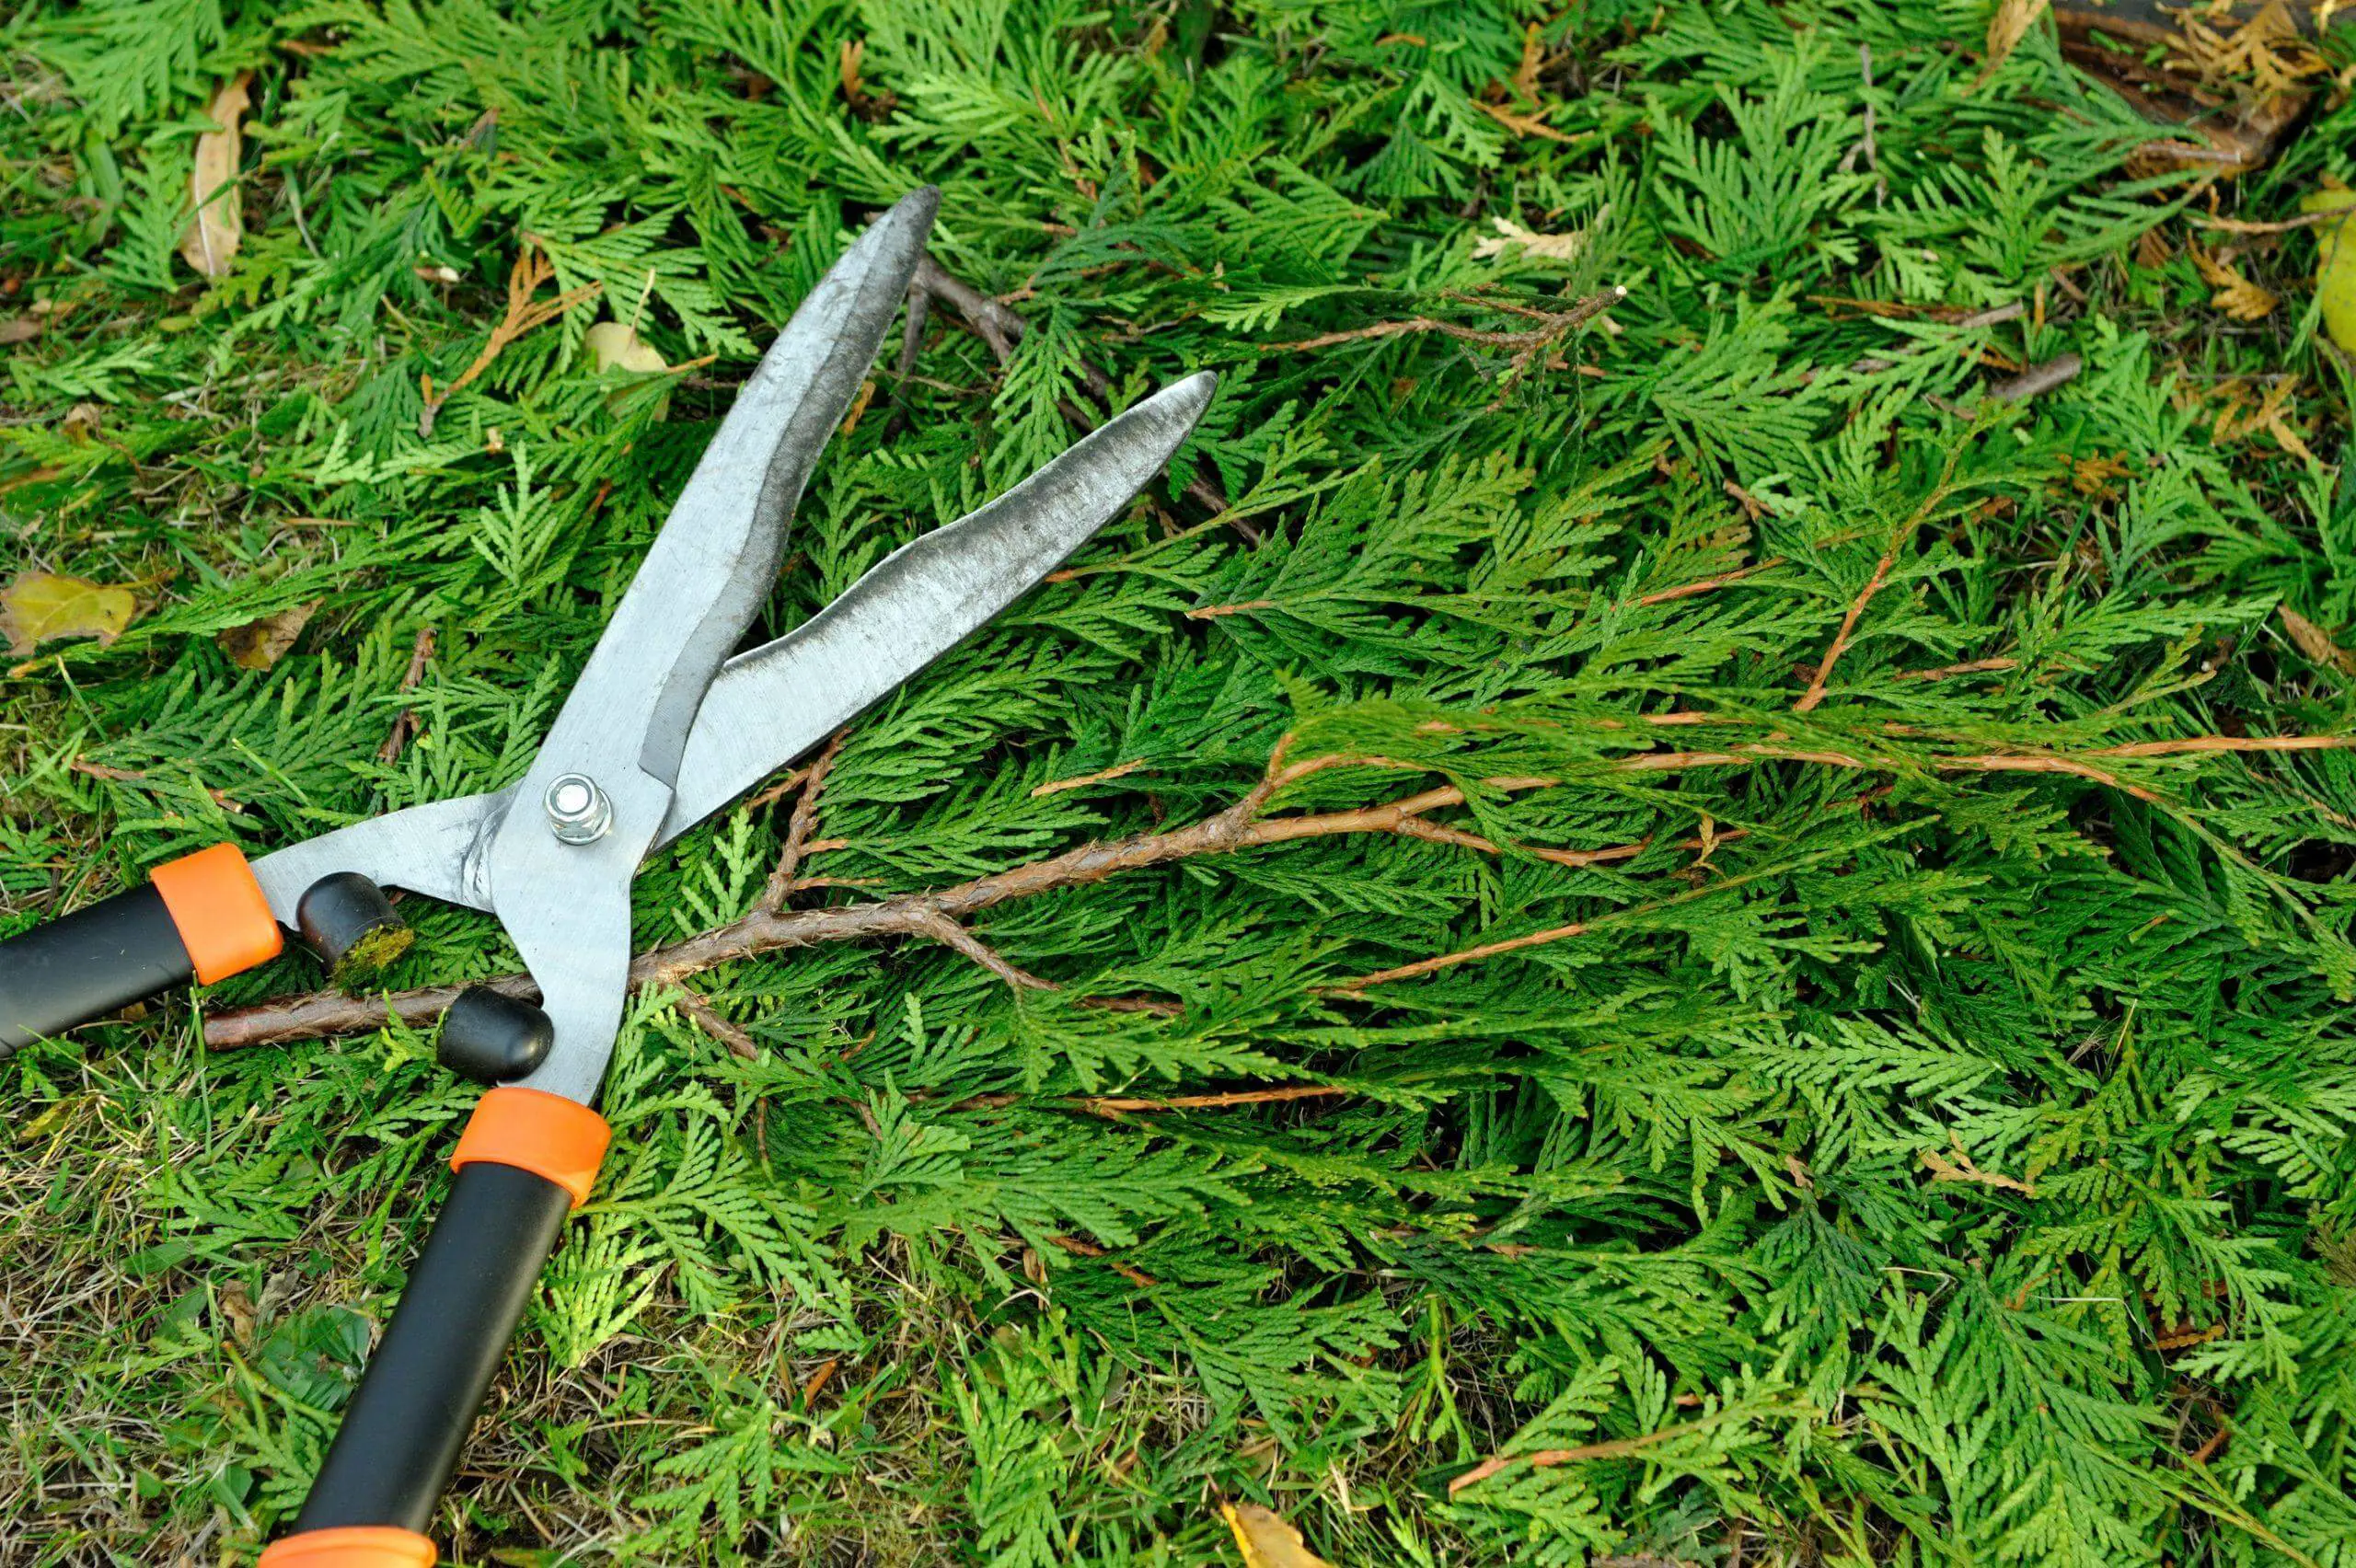 Pruning bushes in the garden with shears